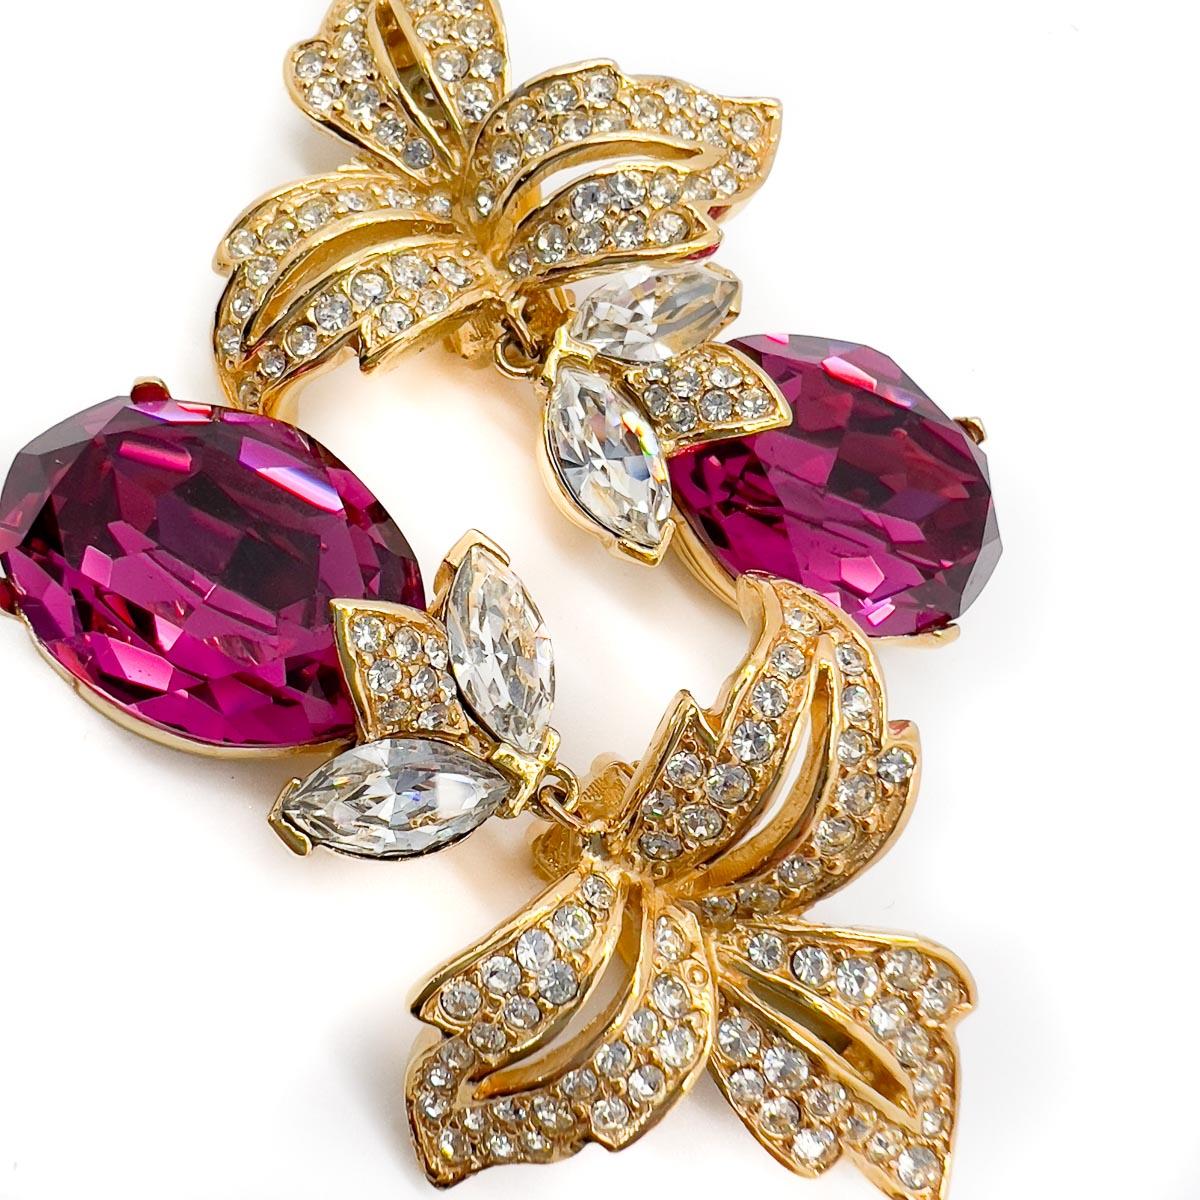 A spectacular pair of vintage Ciner hot pink earrings featuring enormous hot pink drop crystals. The perfect occasion earring from one of America's finest costume jewellery Houses.

Since 1982, New York City based costume jewellery company CINER